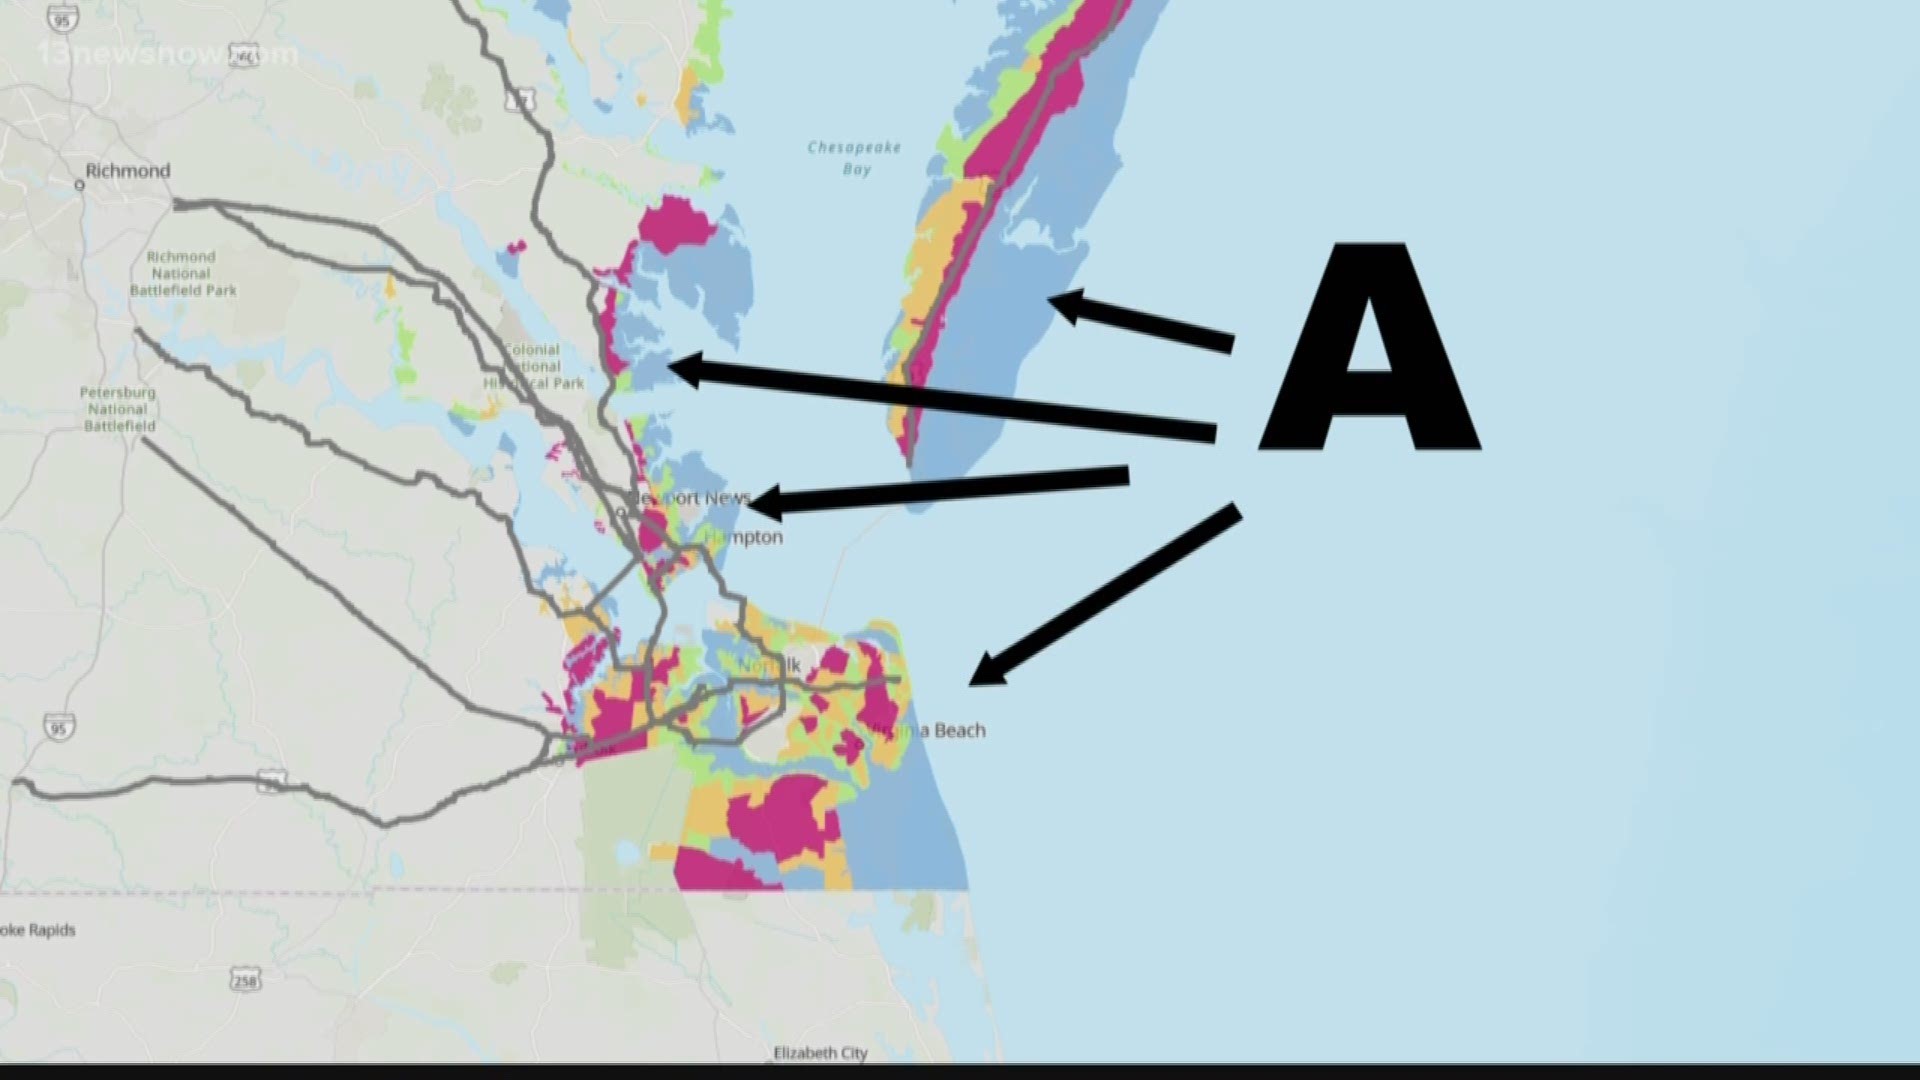 The order came ahead of Hurricane Florence and affects roughly 245,000 people in Hampton Roads. Zone A is one of four hurricane evacuation zones in the state.